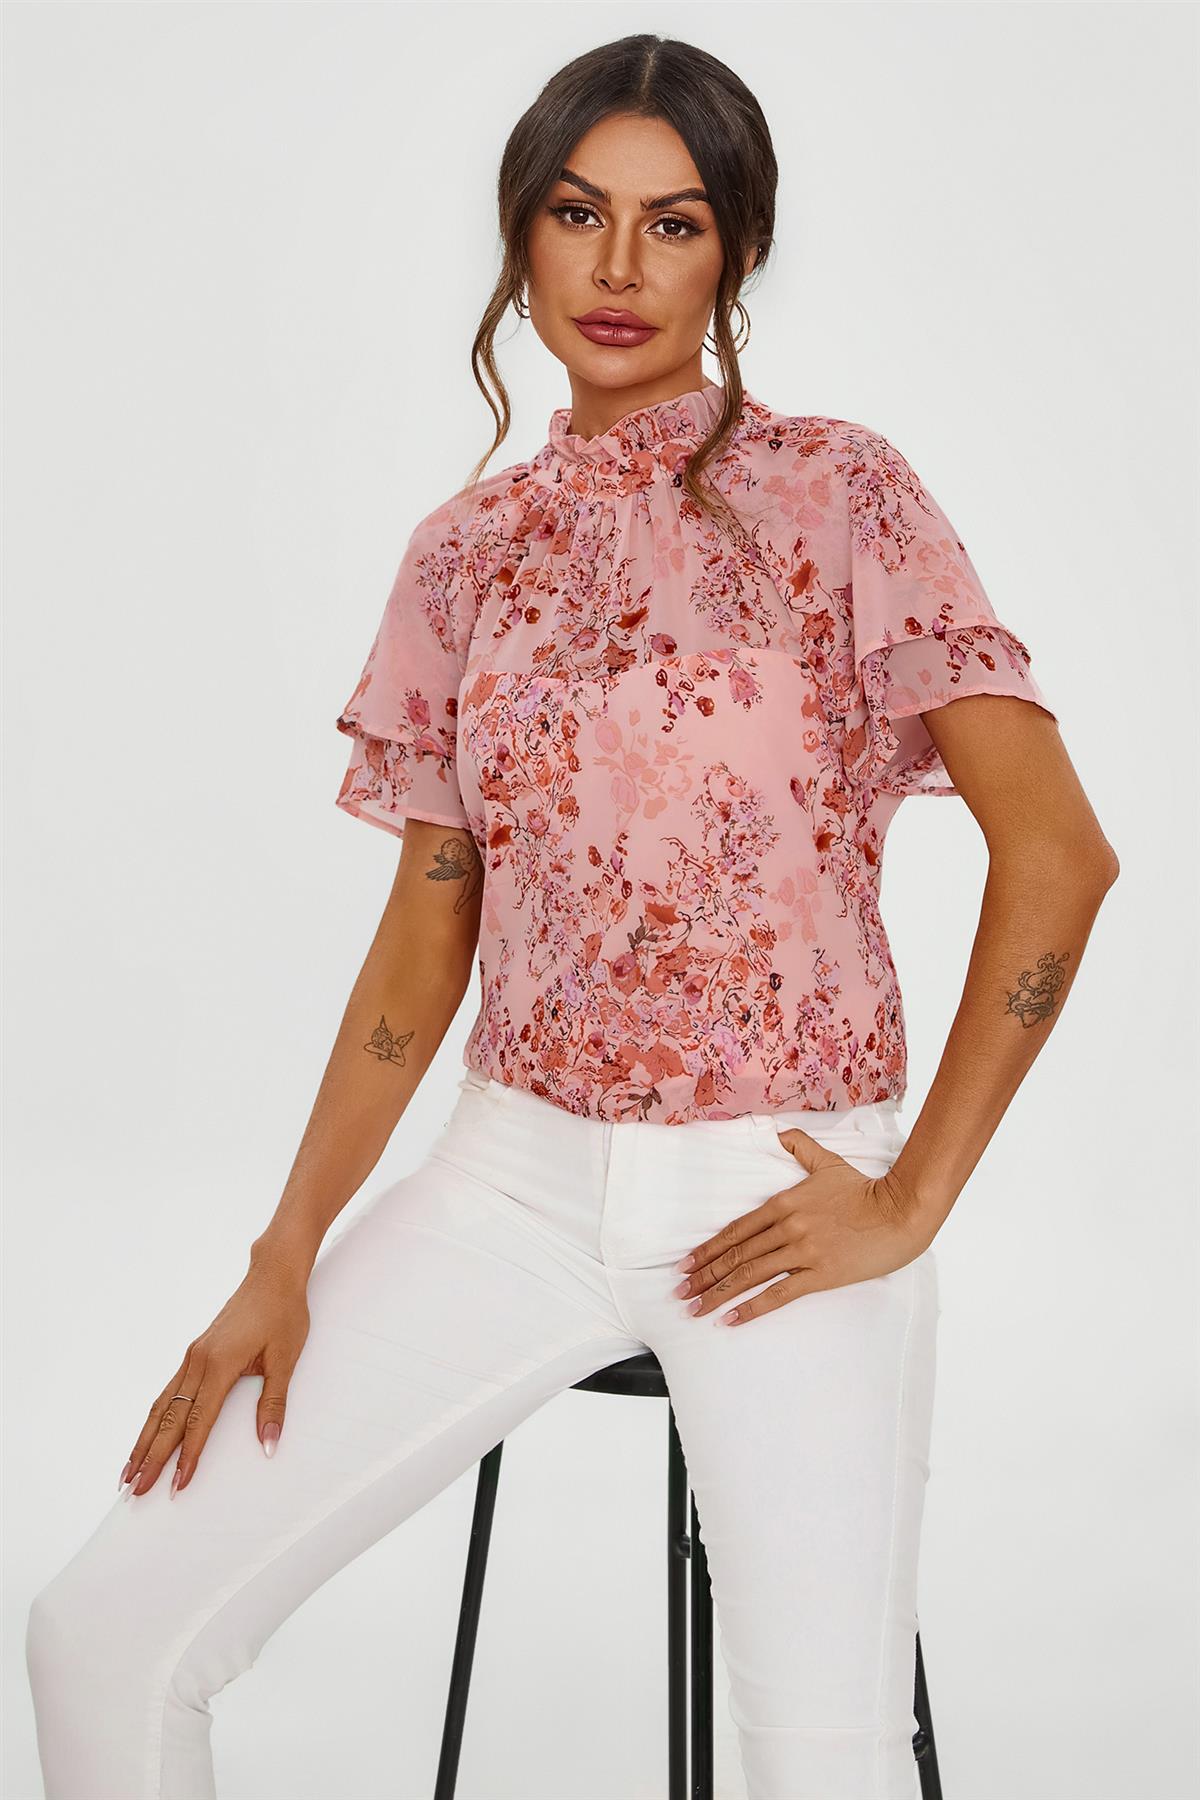 Floral Print Frill Hem Sleeve High Neck Blouse Top In Pink FS657-PinkF